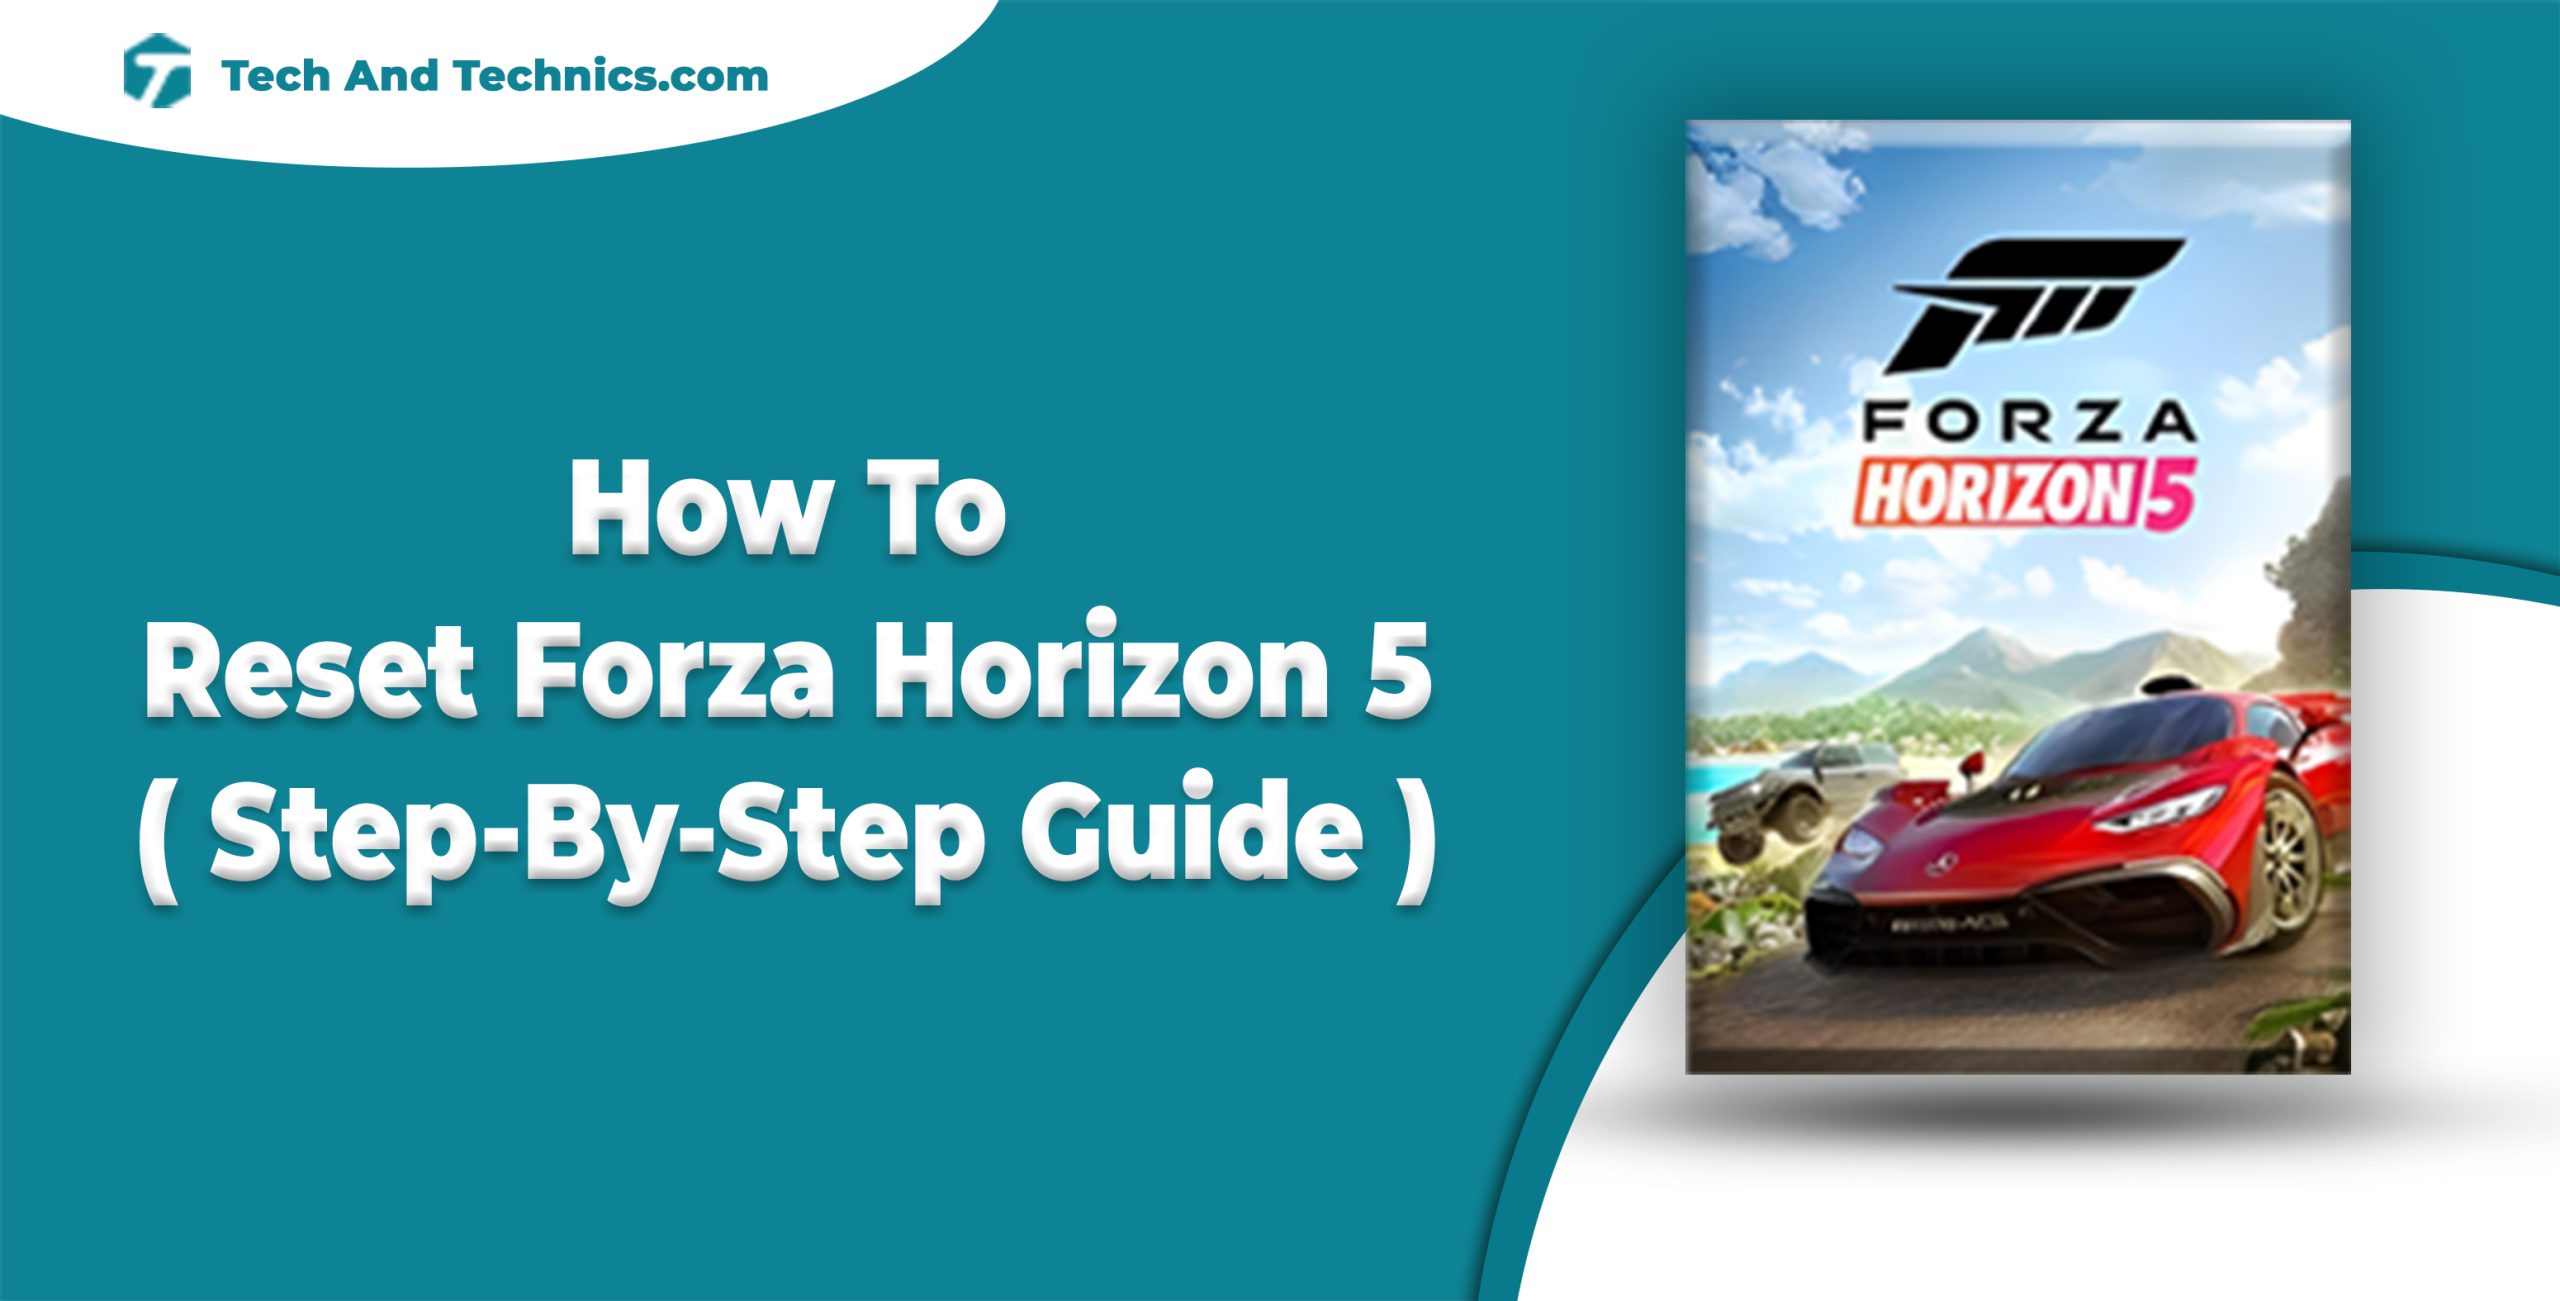 How To Reset Forza Horizon 5 ( Step-By-Step Guide )